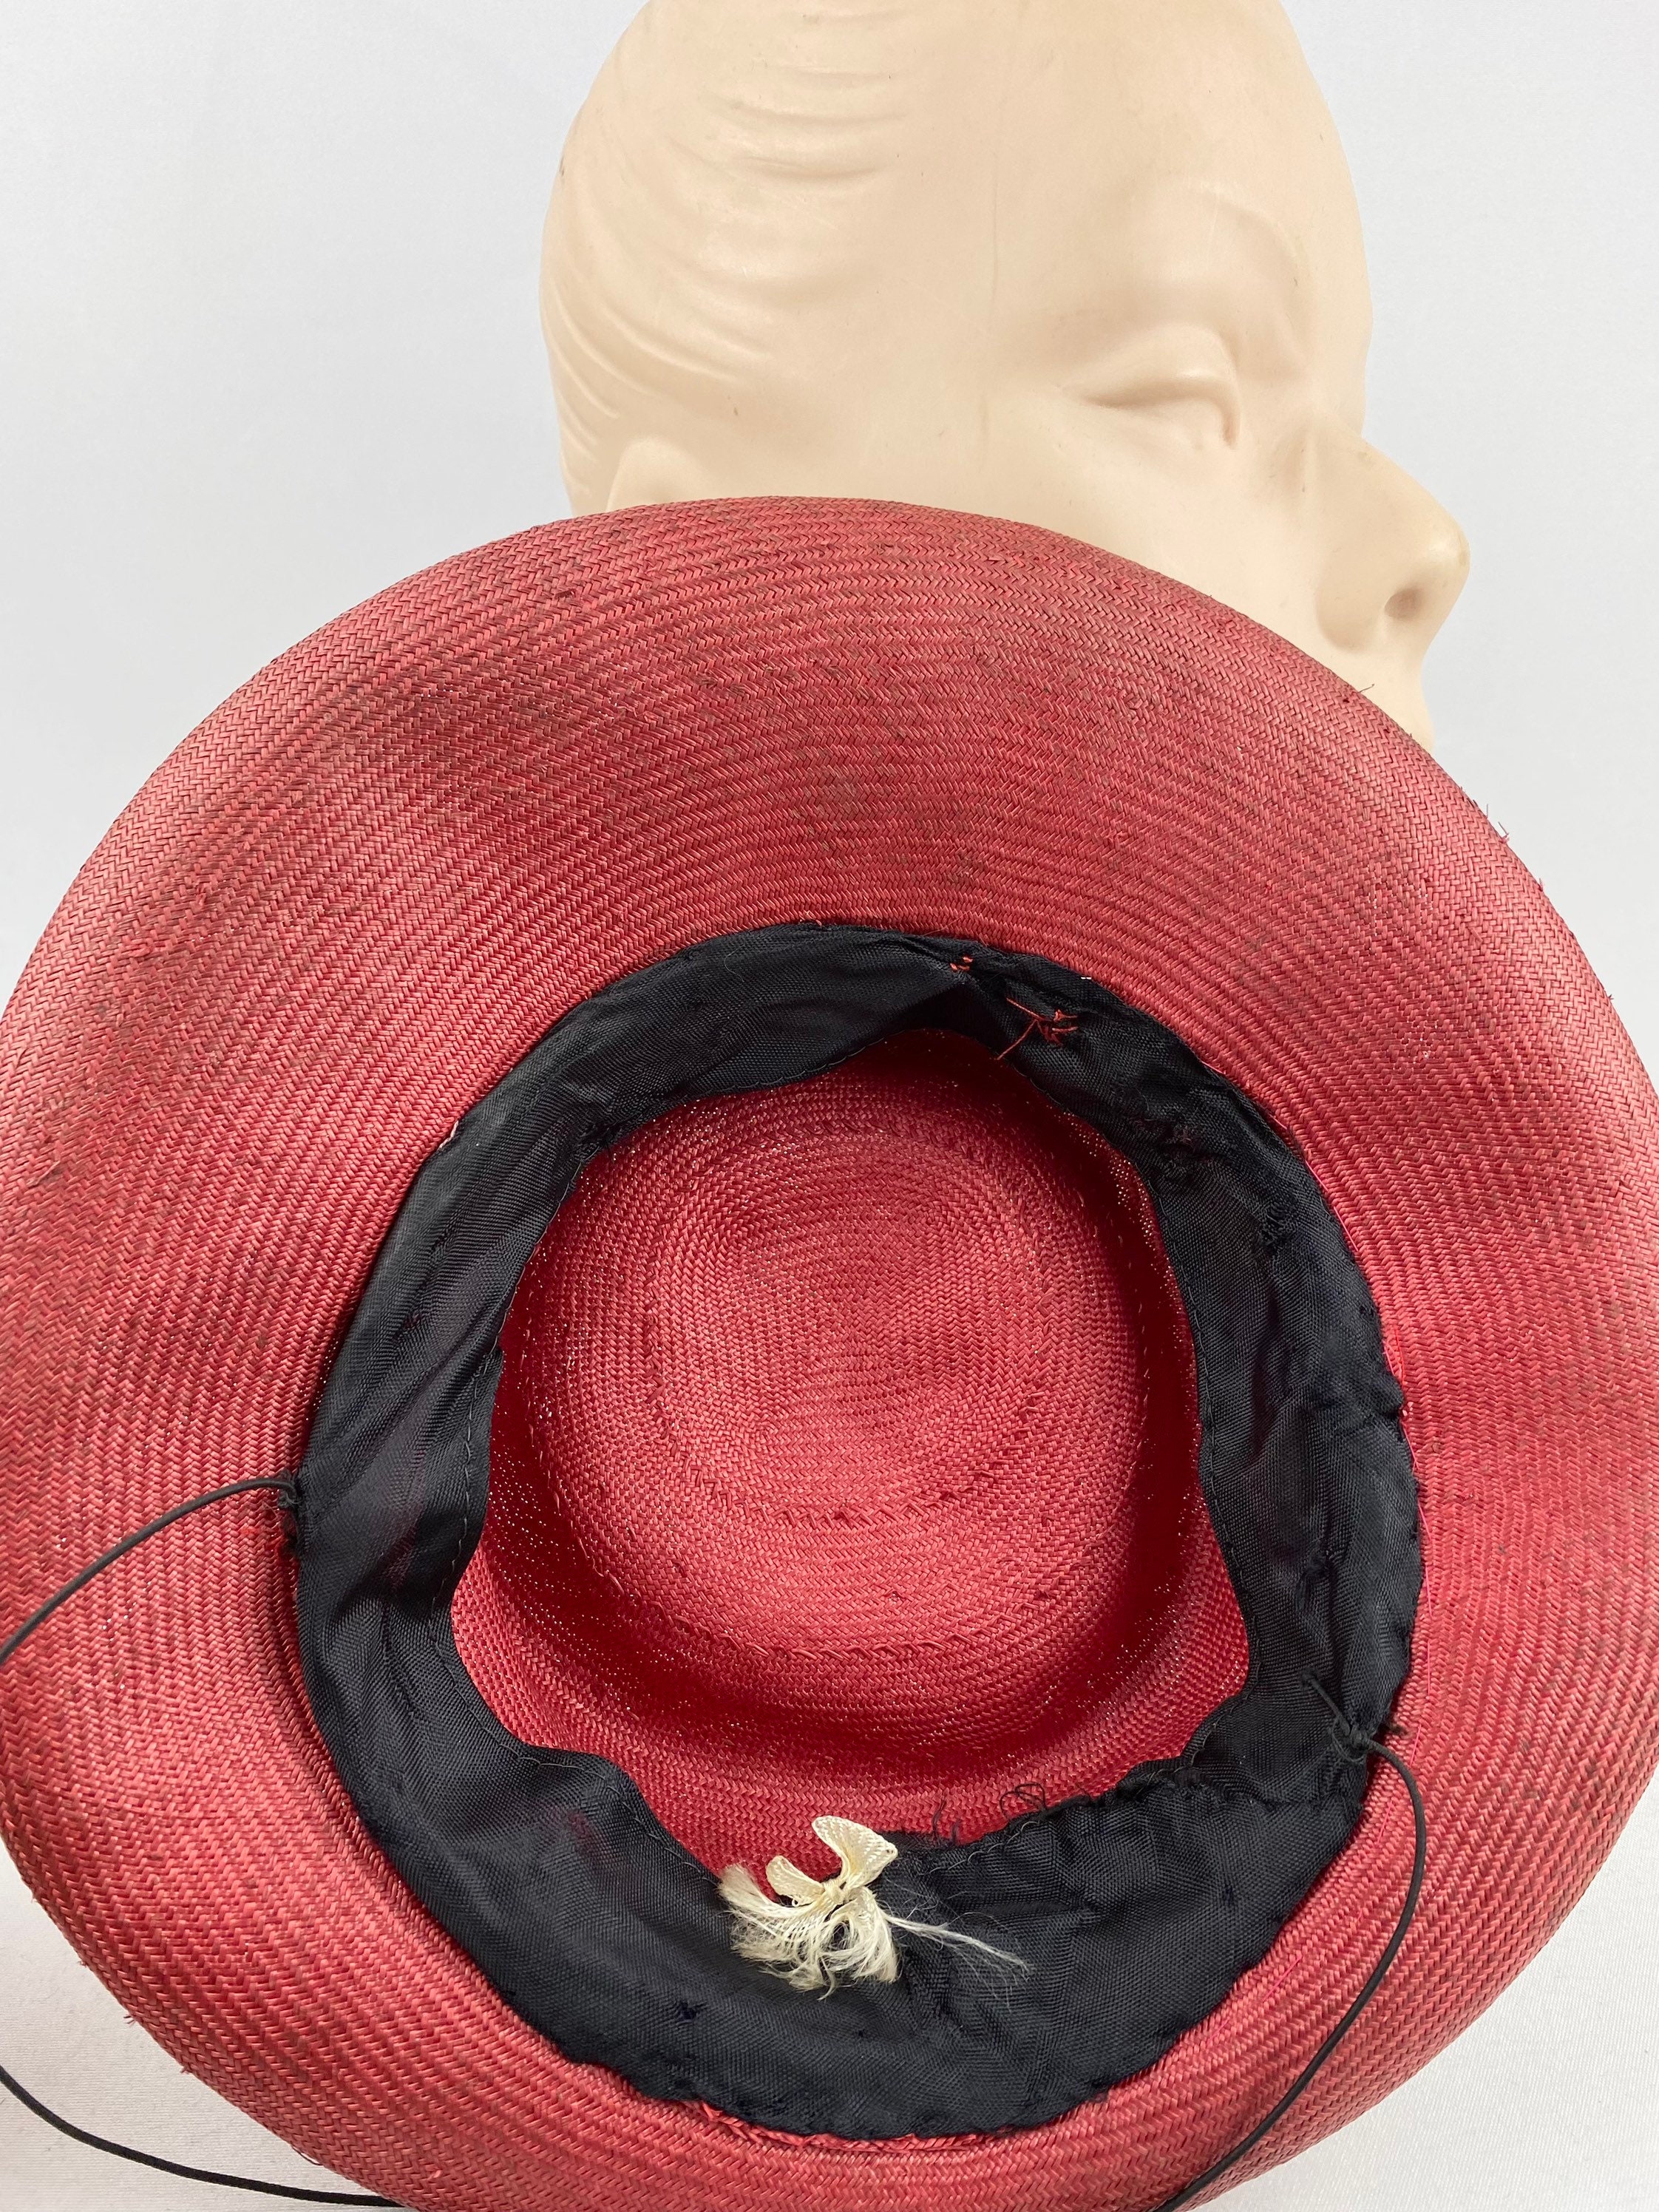 Original 1940s Rusty Red Summer Straw Hat with Fruit and Leaves Trim